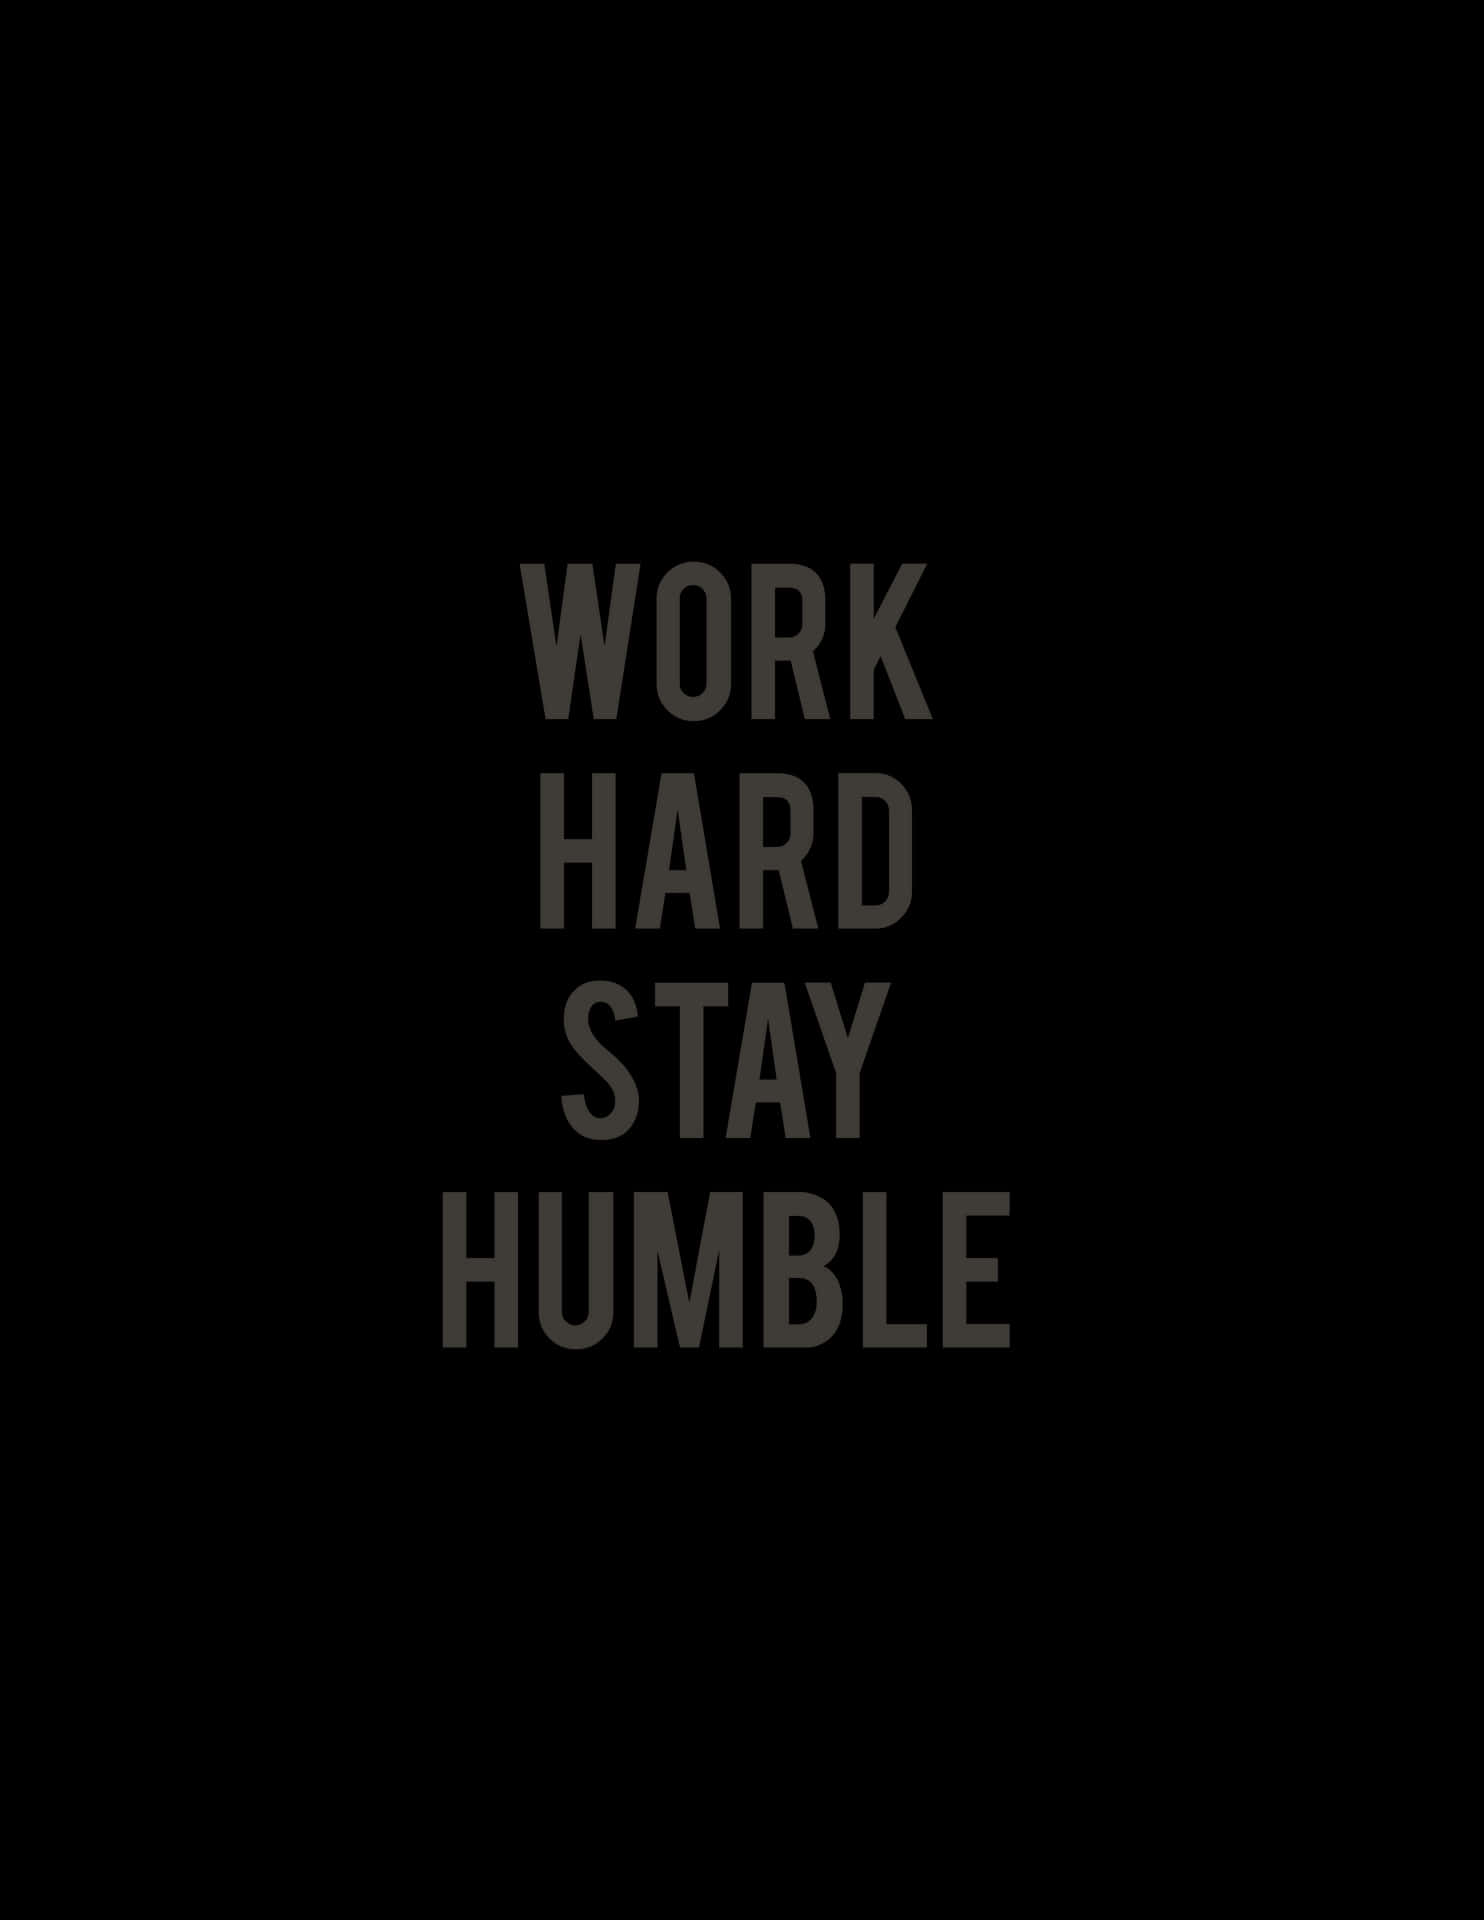 Download Work Hard Stay Humble Wallpaper | Wallpapers.Com